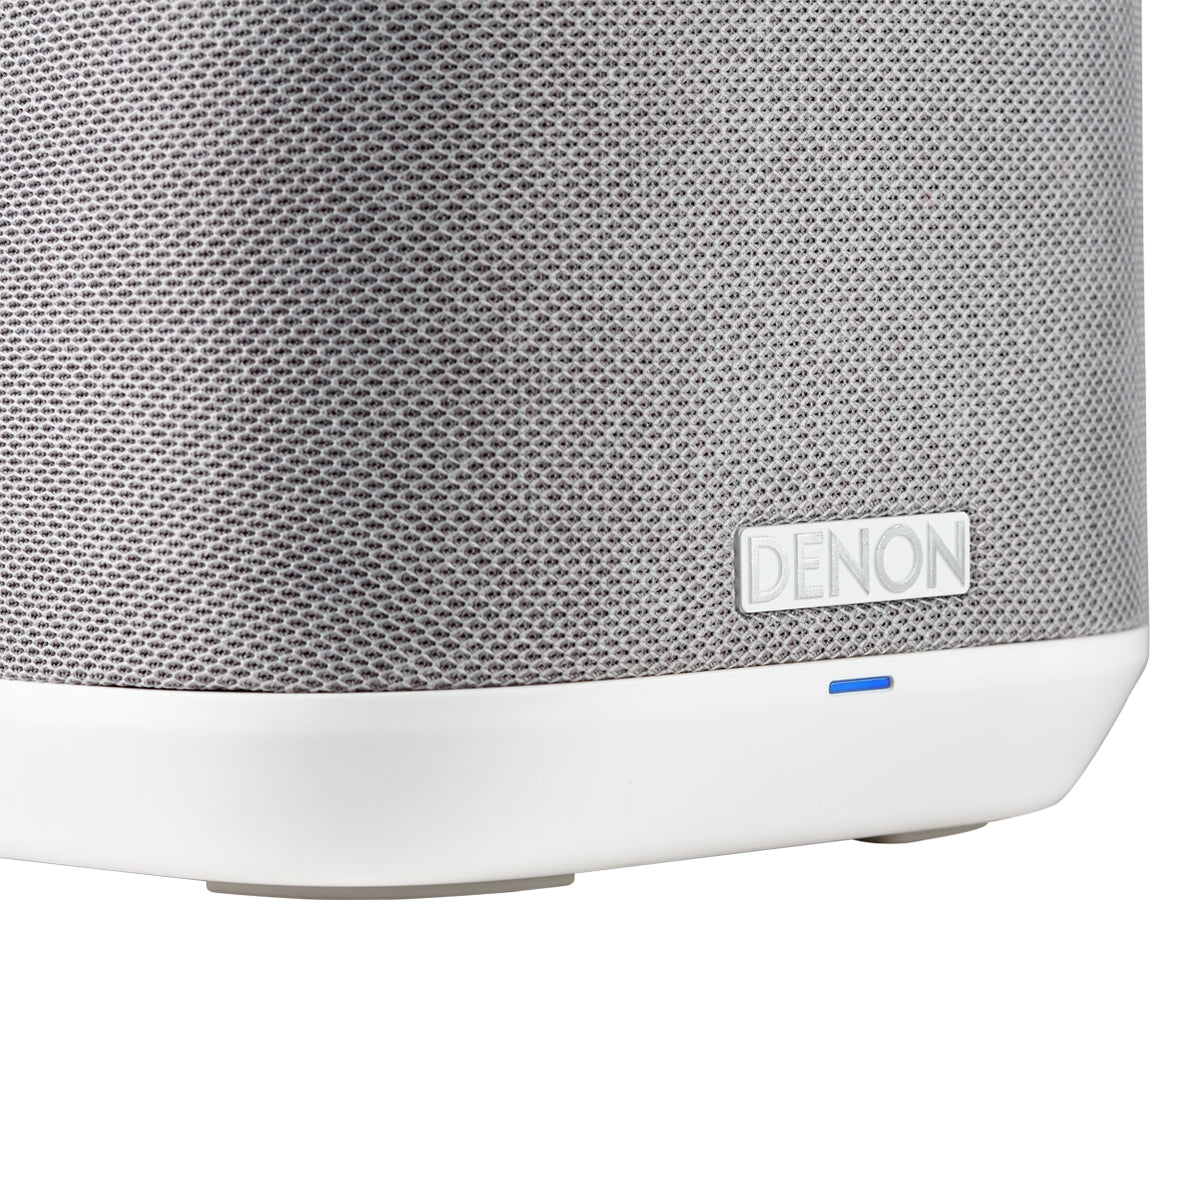 Denon Home 150 Wireless Speaker - White (out of stock) - The Audio Experts